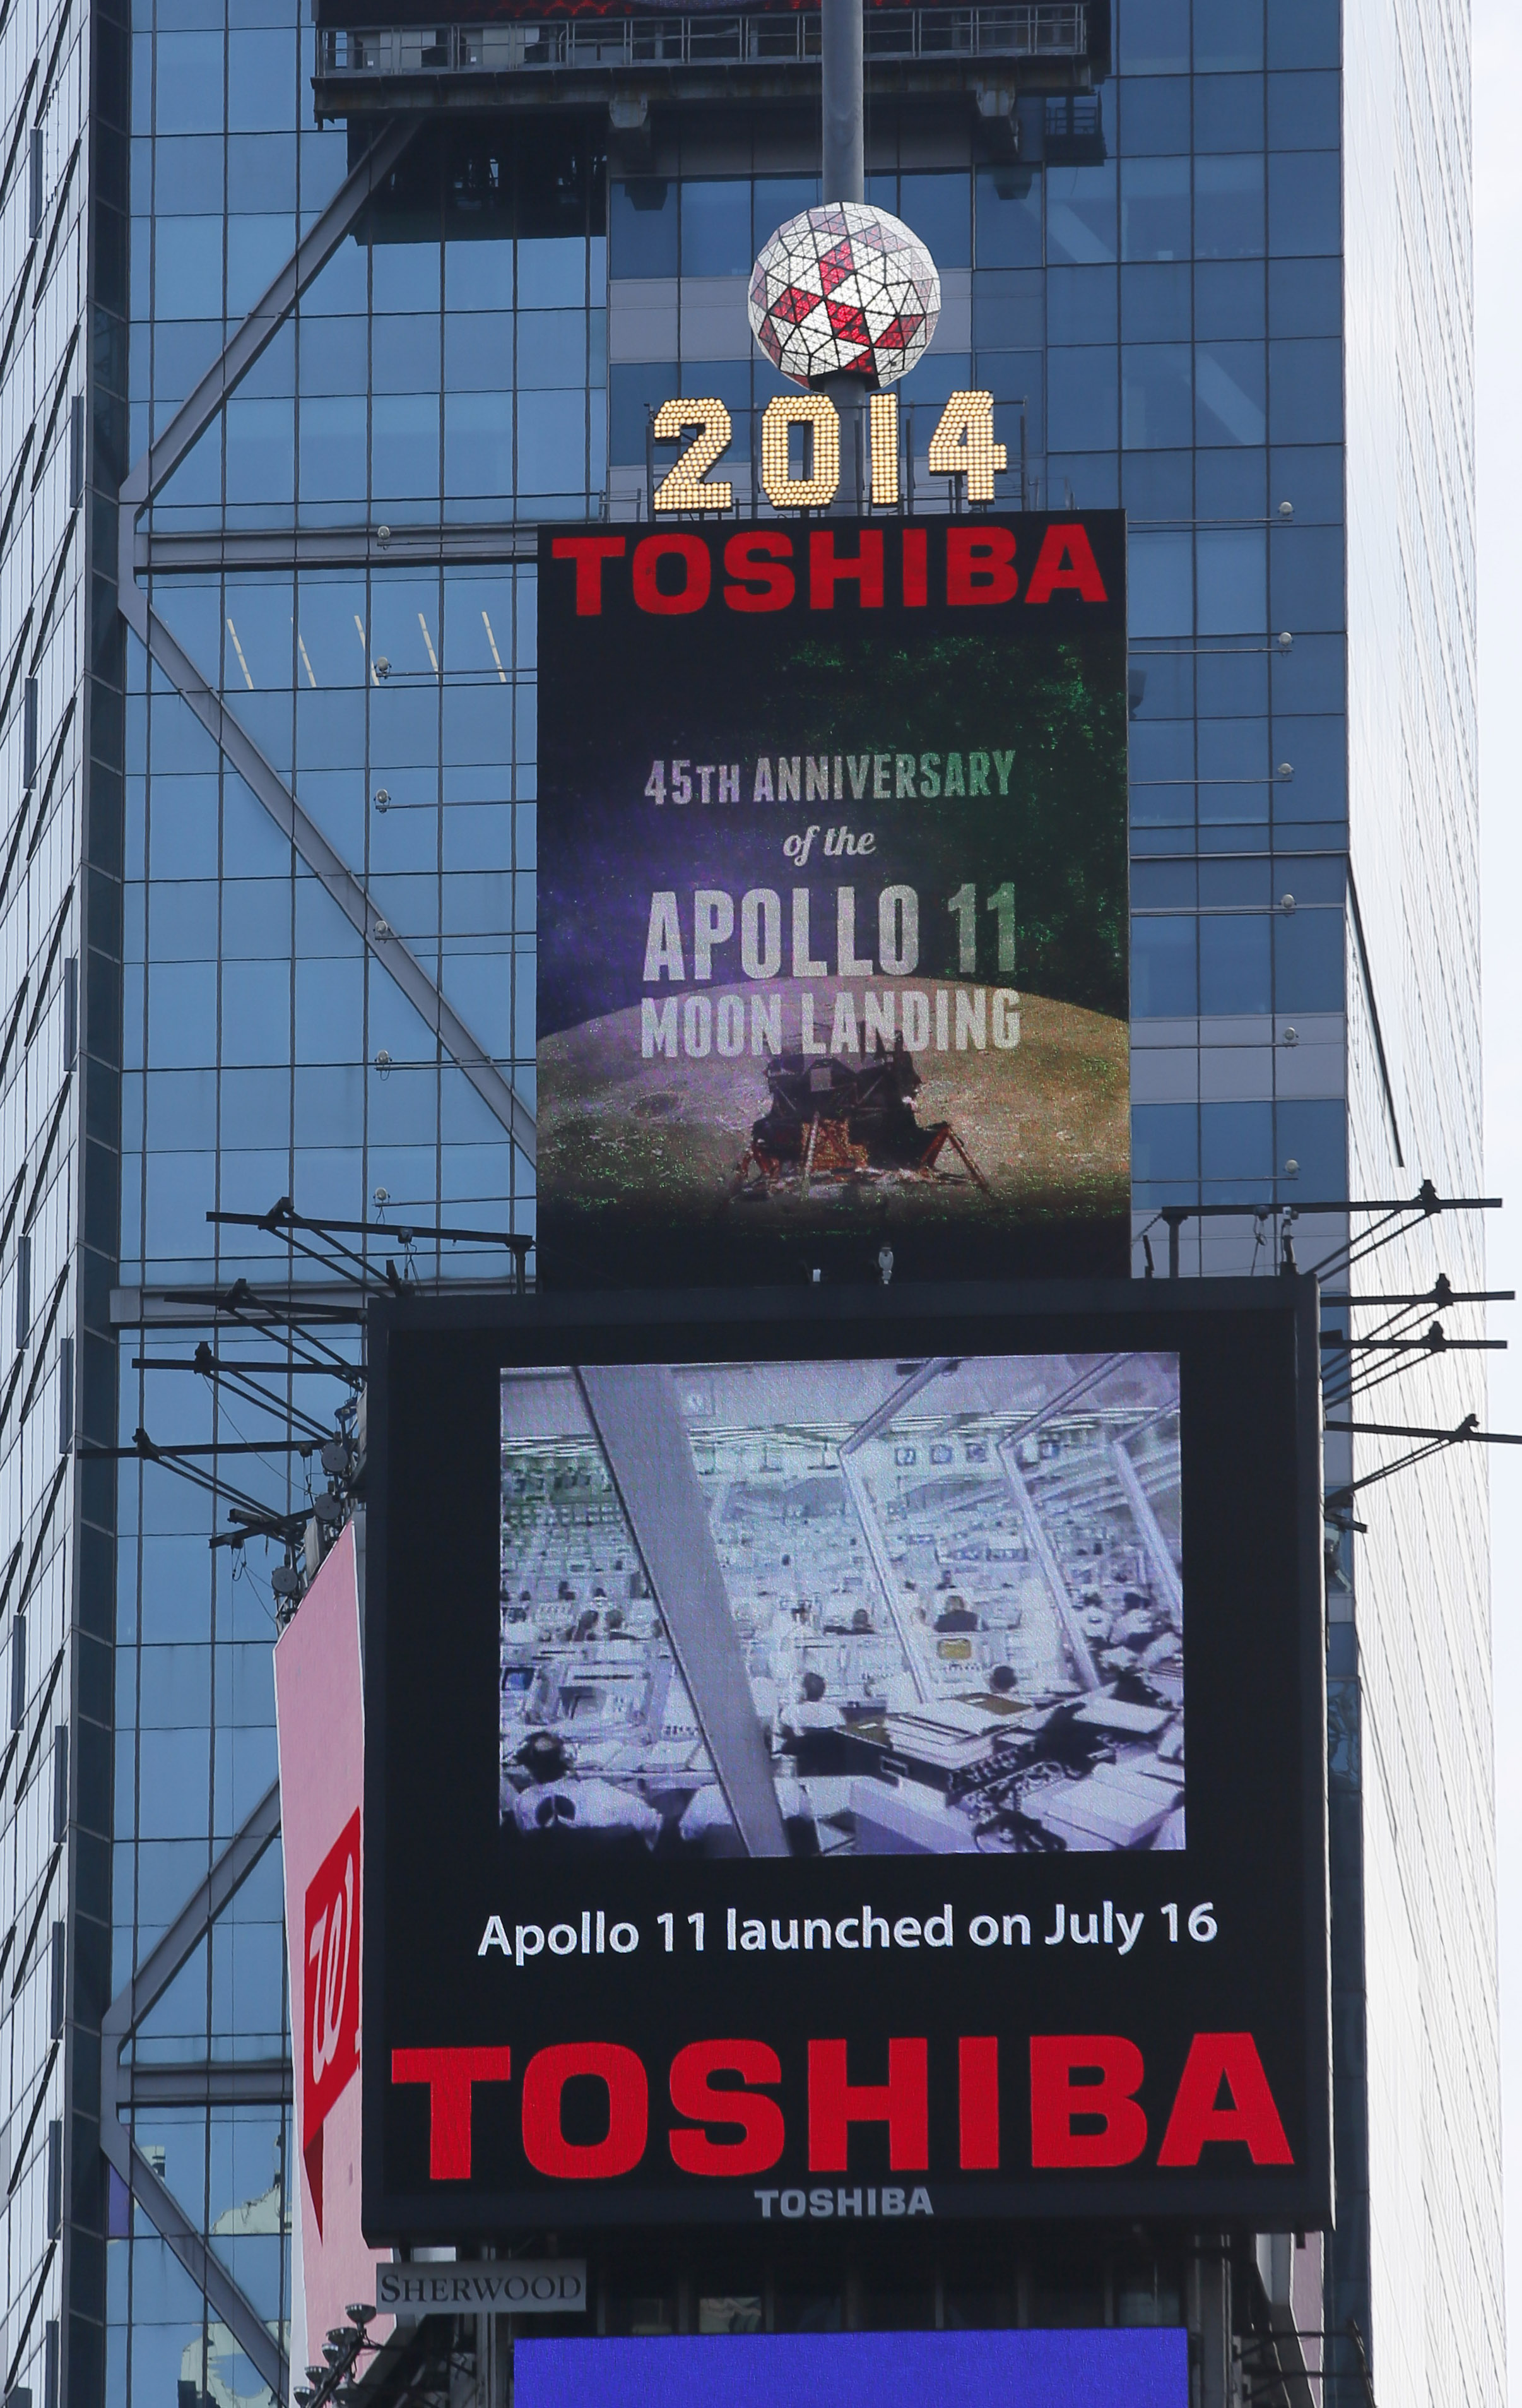 Toshiba celebrates the 45th anniversary of the Apollo 11 space mission with a broadcast of two historic NASA videos on its Toshiba Vision Screens high atop One Times Square, Sunday, July 20, 2014.